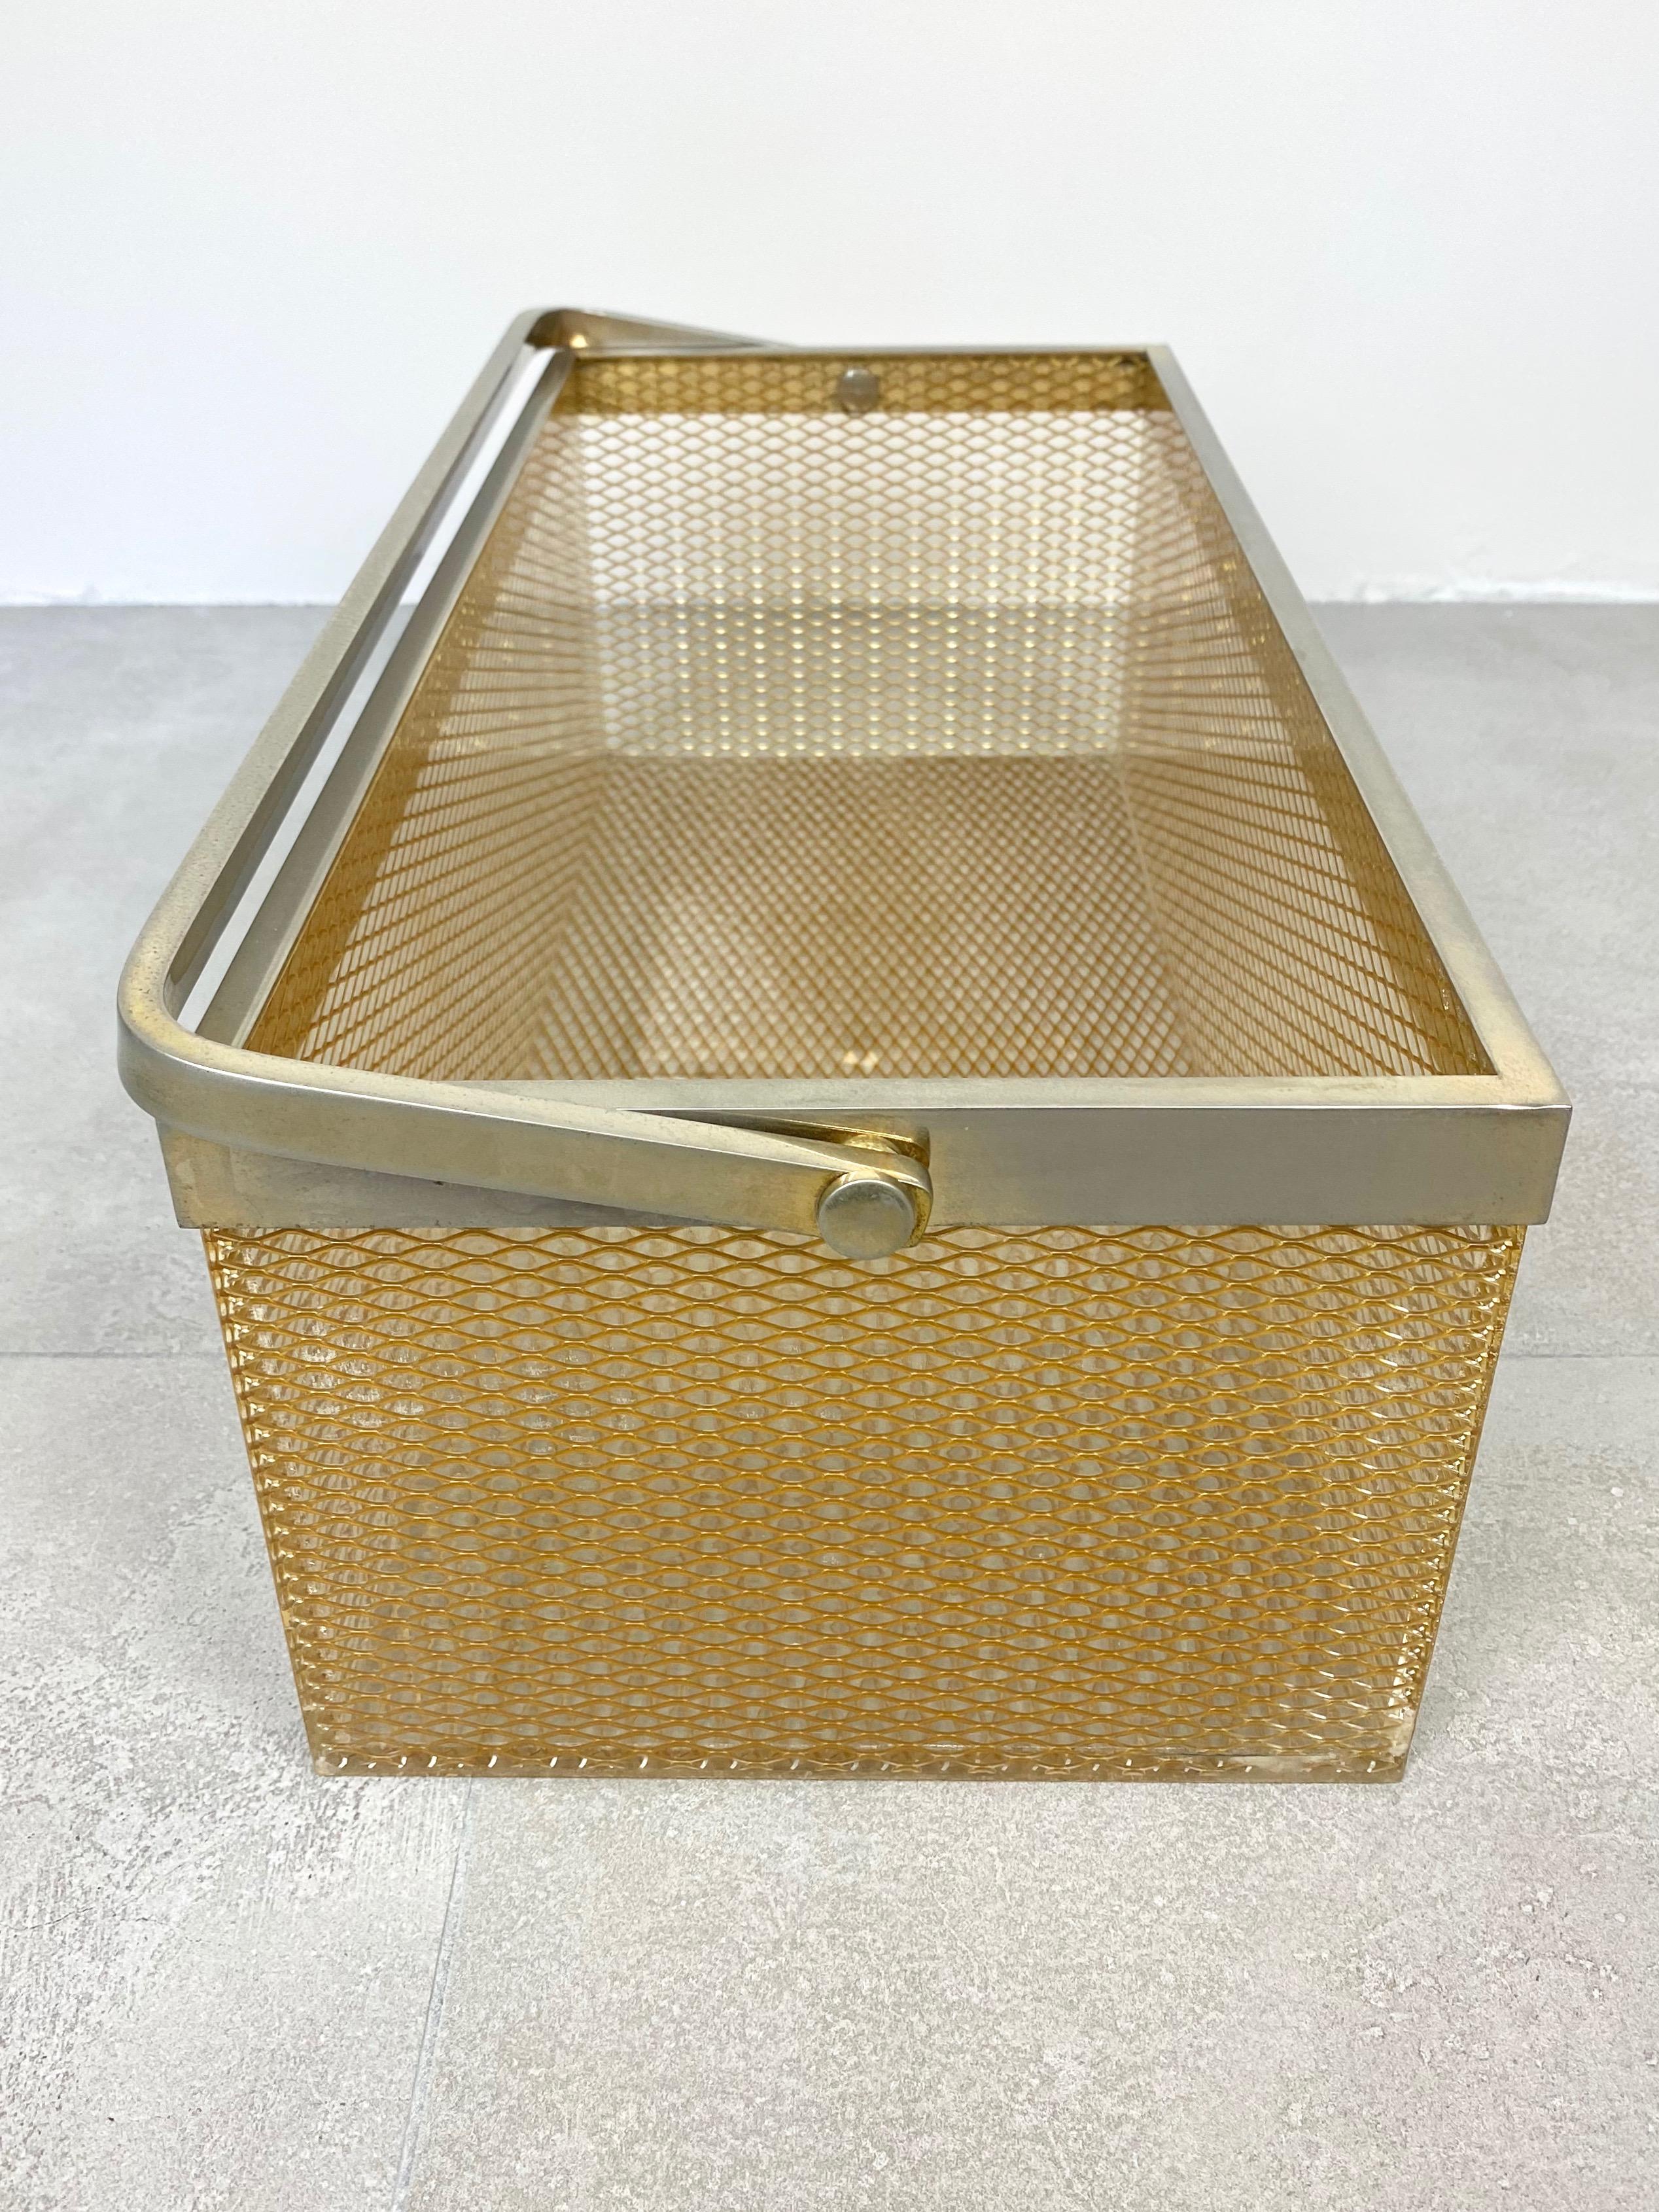 Metal Magazine Holder Rack in Nickel and Netting Lucite, Italy, 1970s For Sale